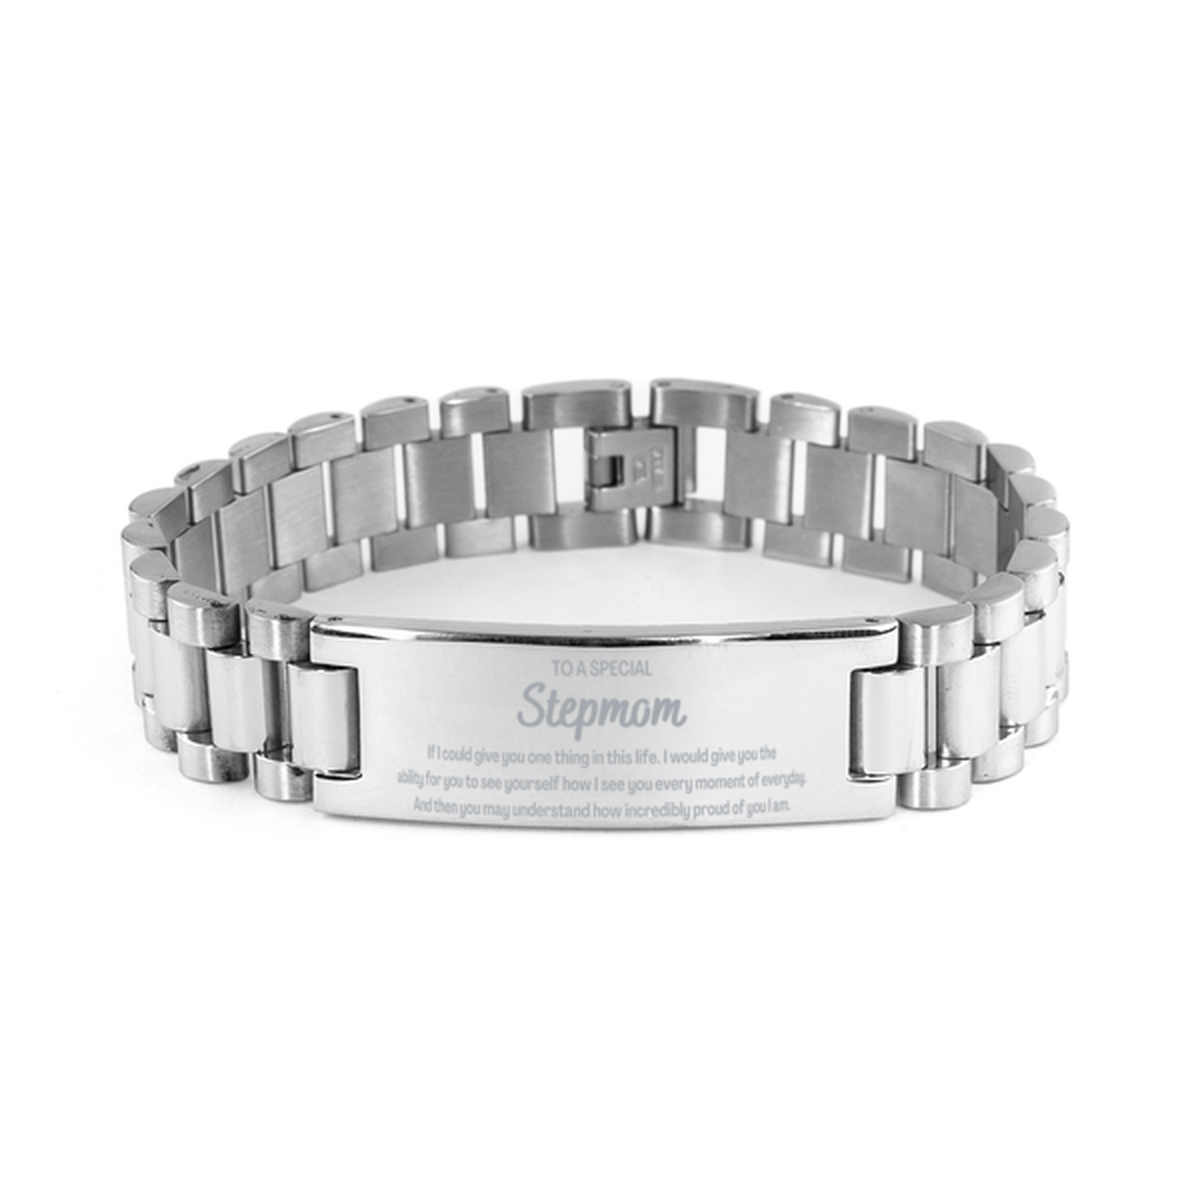 To My Stepmom Ladder Stainless Steel Bracelet, Gifts For Stepmom Engraved, Inspirational Gifts for Christmas Birthday, Epic Gifts for Stepmom To A Special Stepmom how incredibly proud of you I am